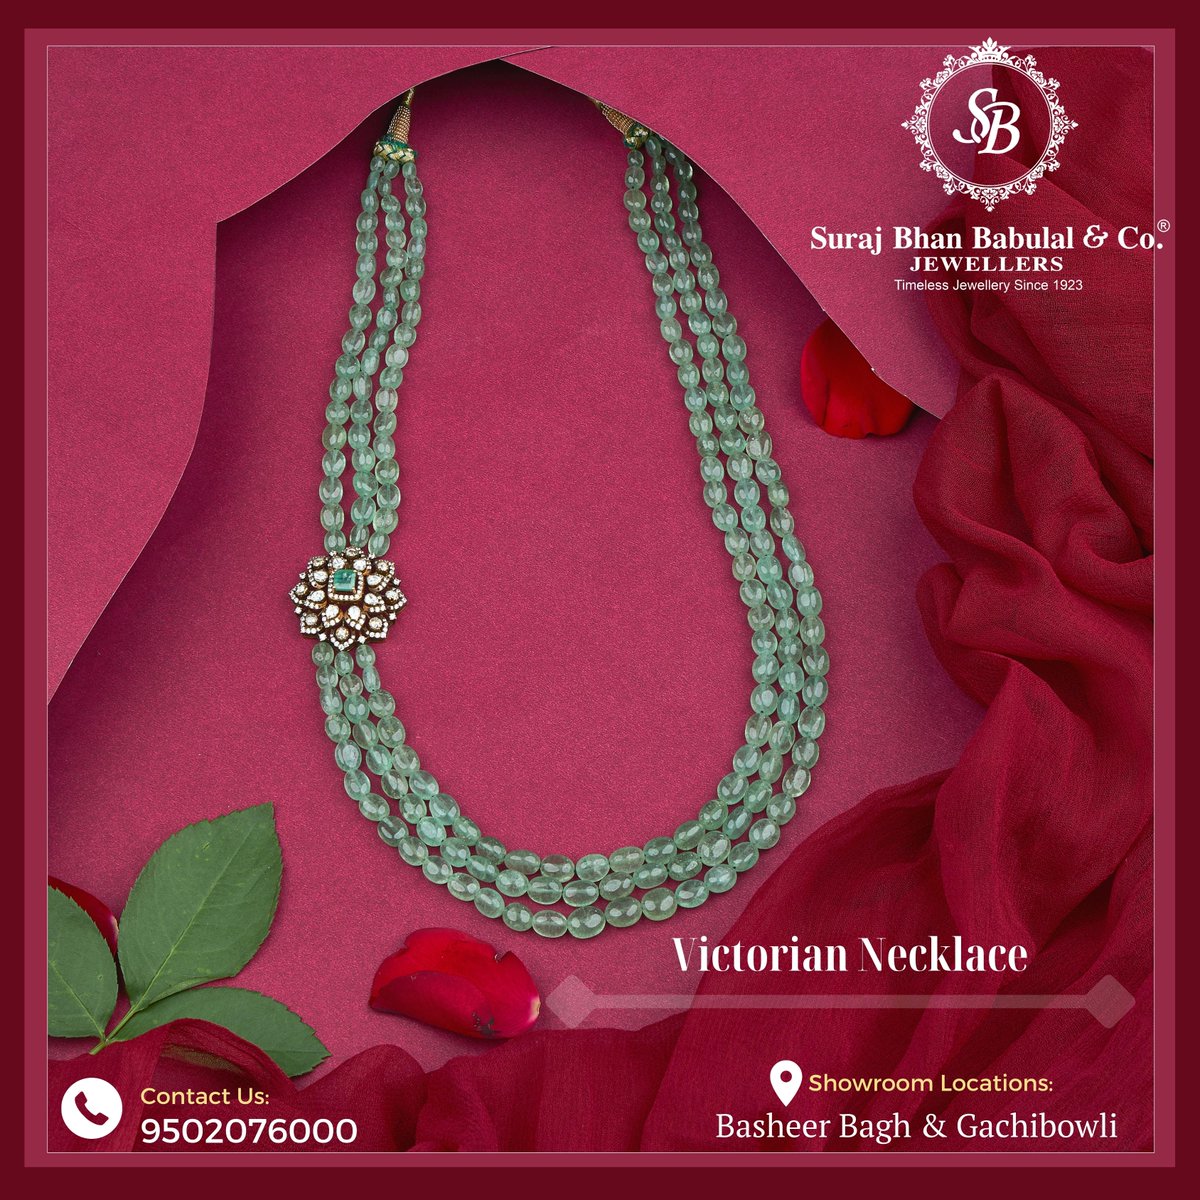 A Timeless Treasure: Adorn yourself with the exquisite elegance of this Victorian necklace, a radiant symbol of opulence and grace.

For inquiries please contact-7997995580

#pearlhaaram #JewelryLove #ElegantJewelry #surajbhangachibowli #surajbhanjewelleryhub #victoriannecklace